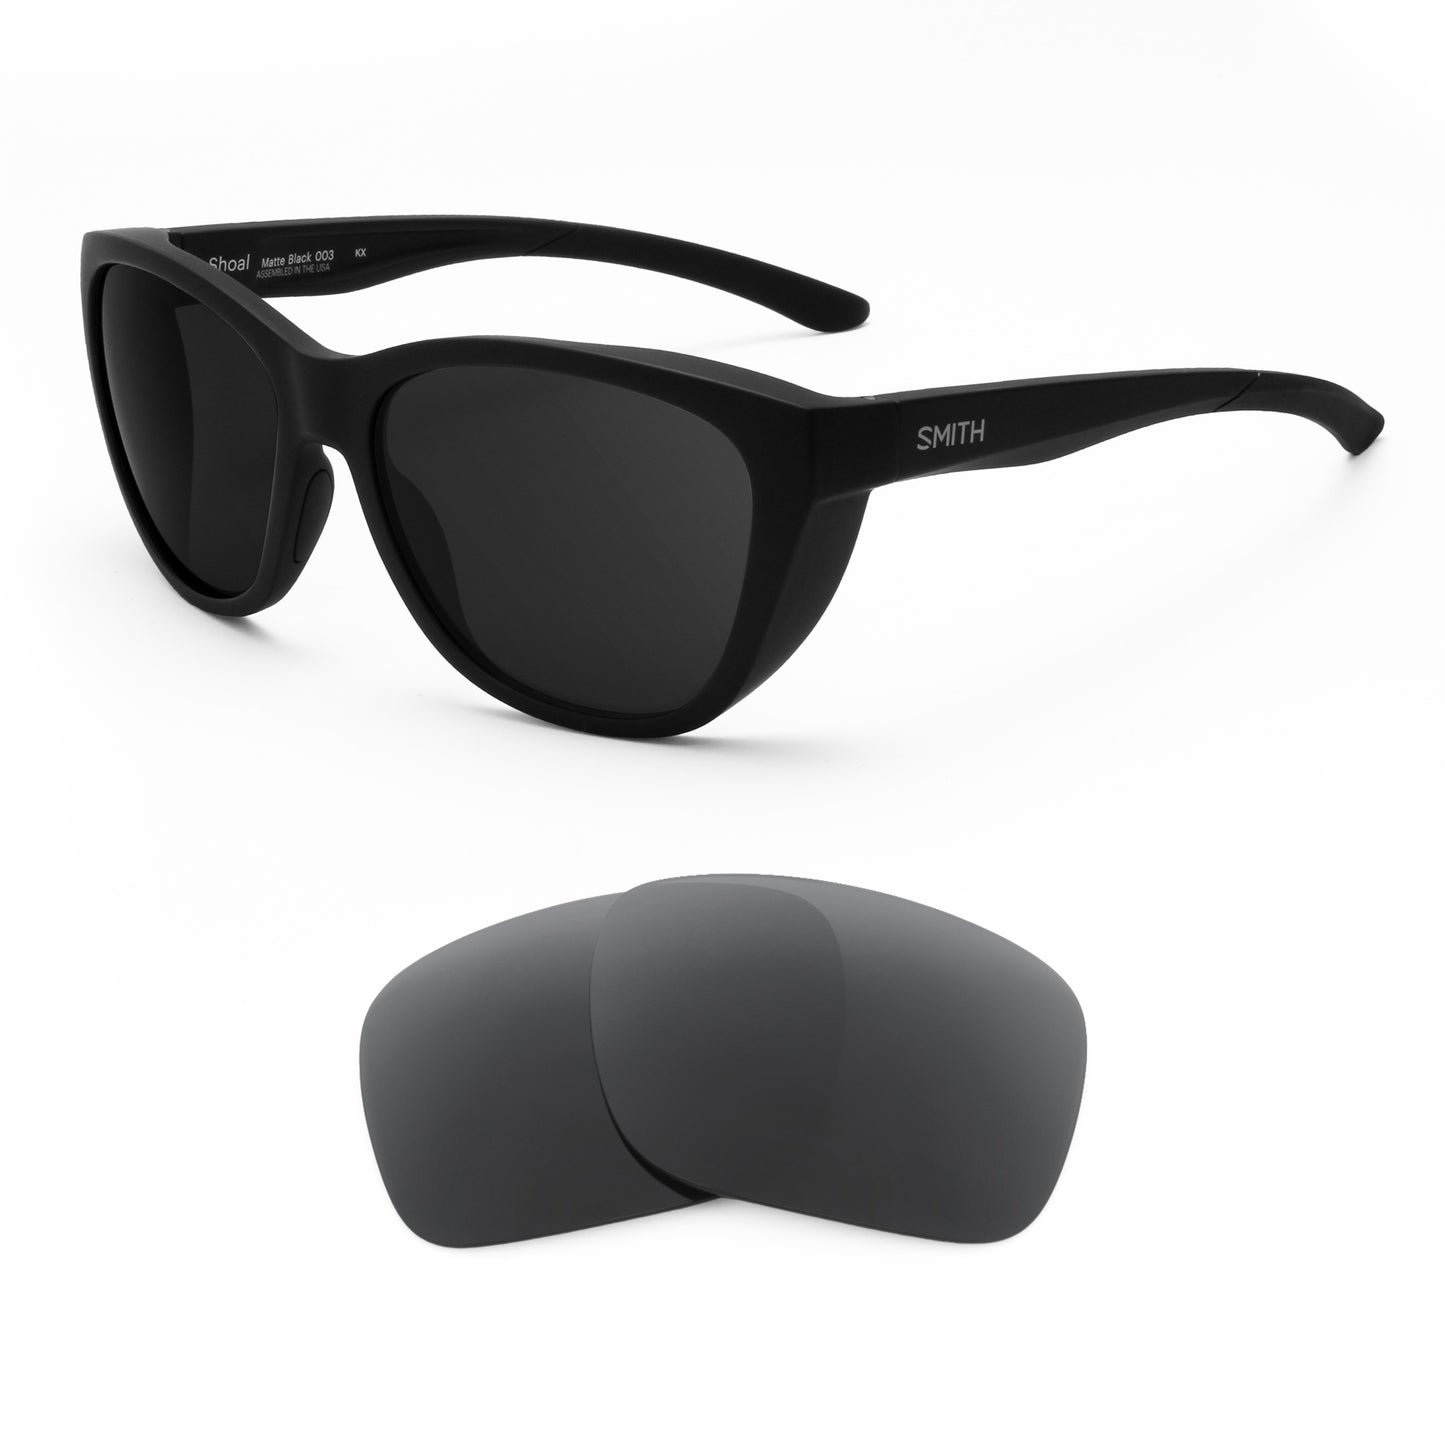 Smith Shoal sunglasses with replacement lenses